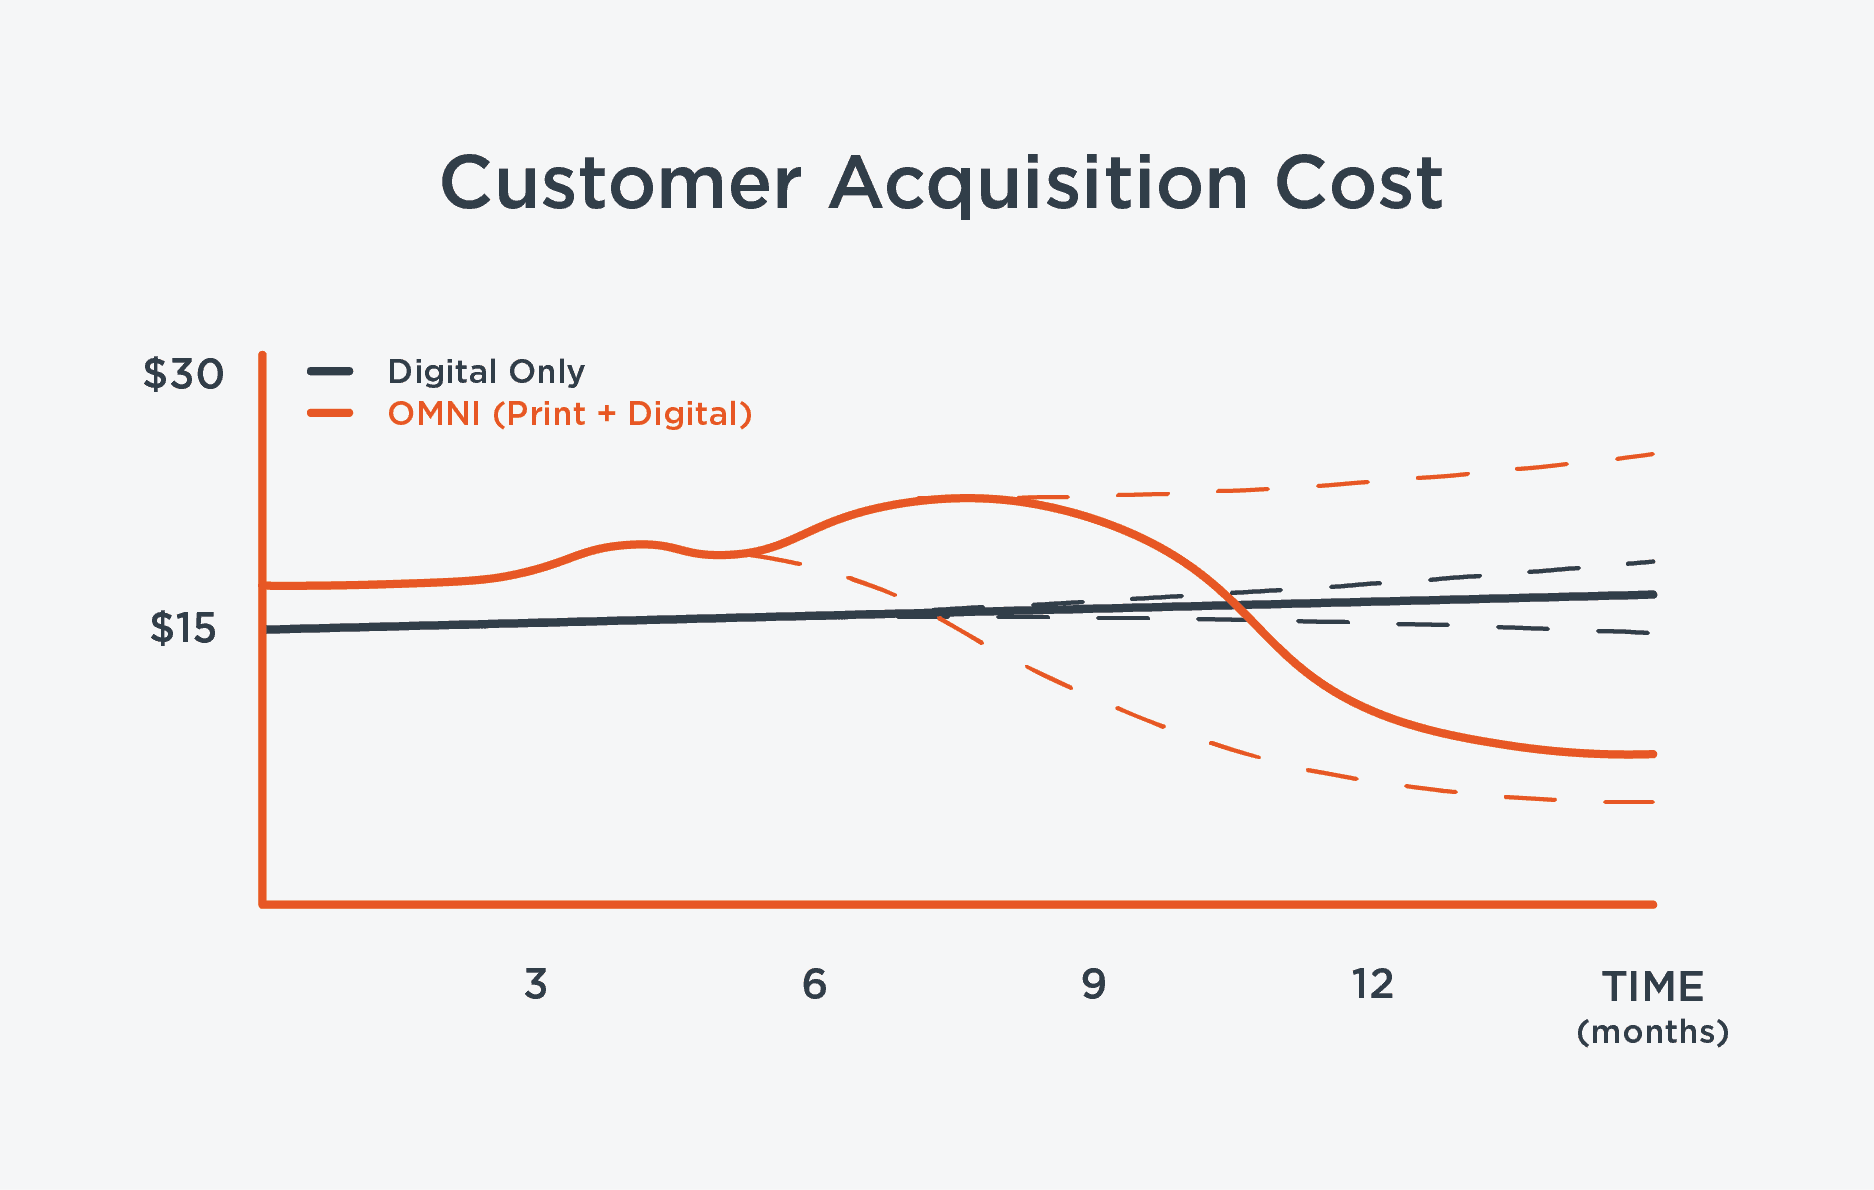 Line graph comparing customer acquisition cost between digital and omni (print + digital) marketing campaigns